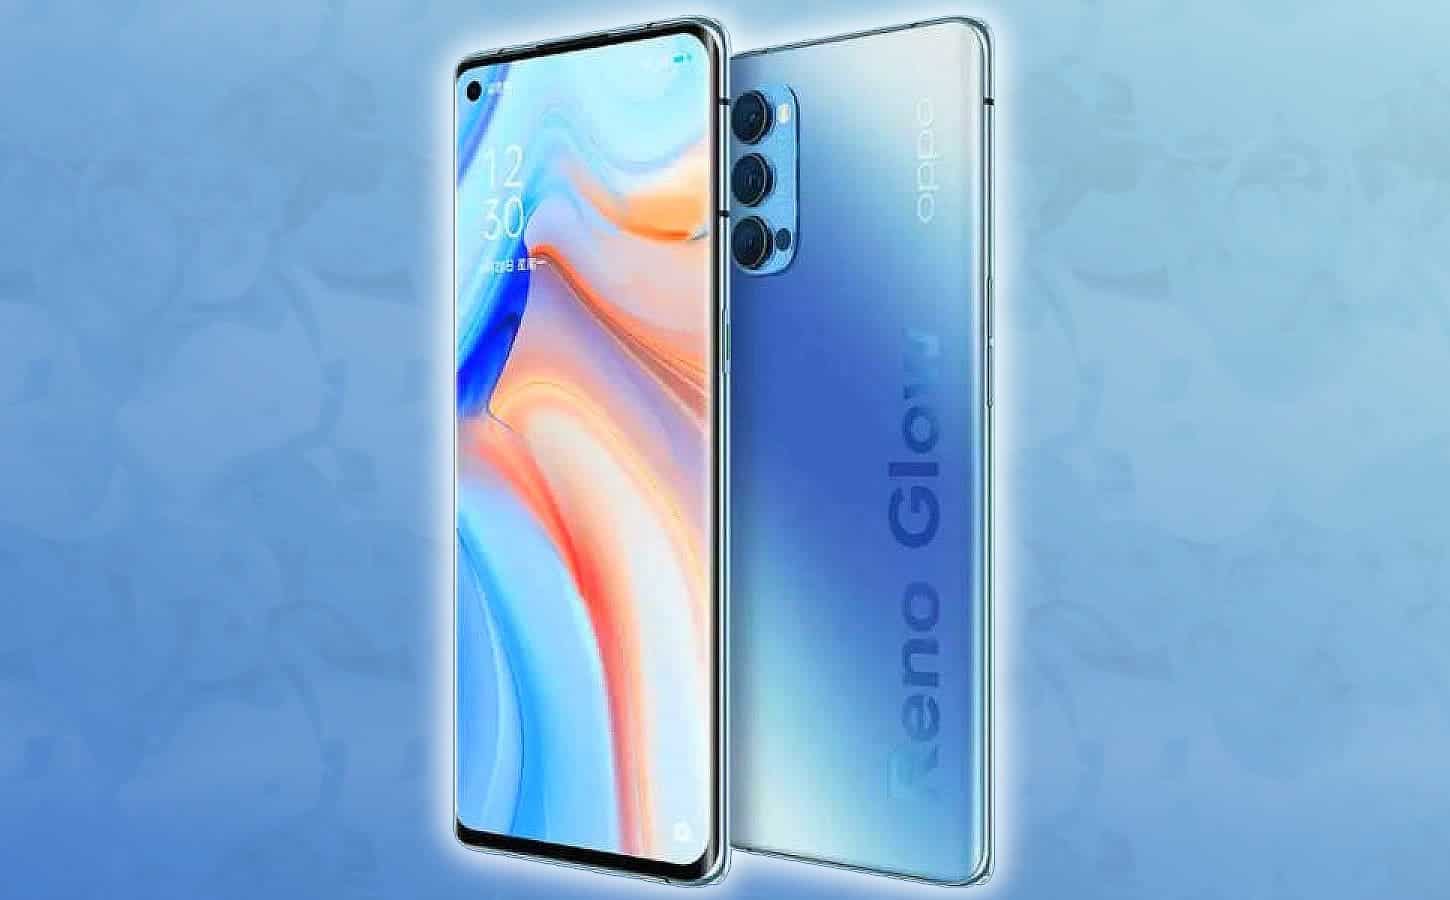 https://www.gizchina.com/wp-content/uploads/images/2020/05/oppo-reno-4-images-glun.jpg